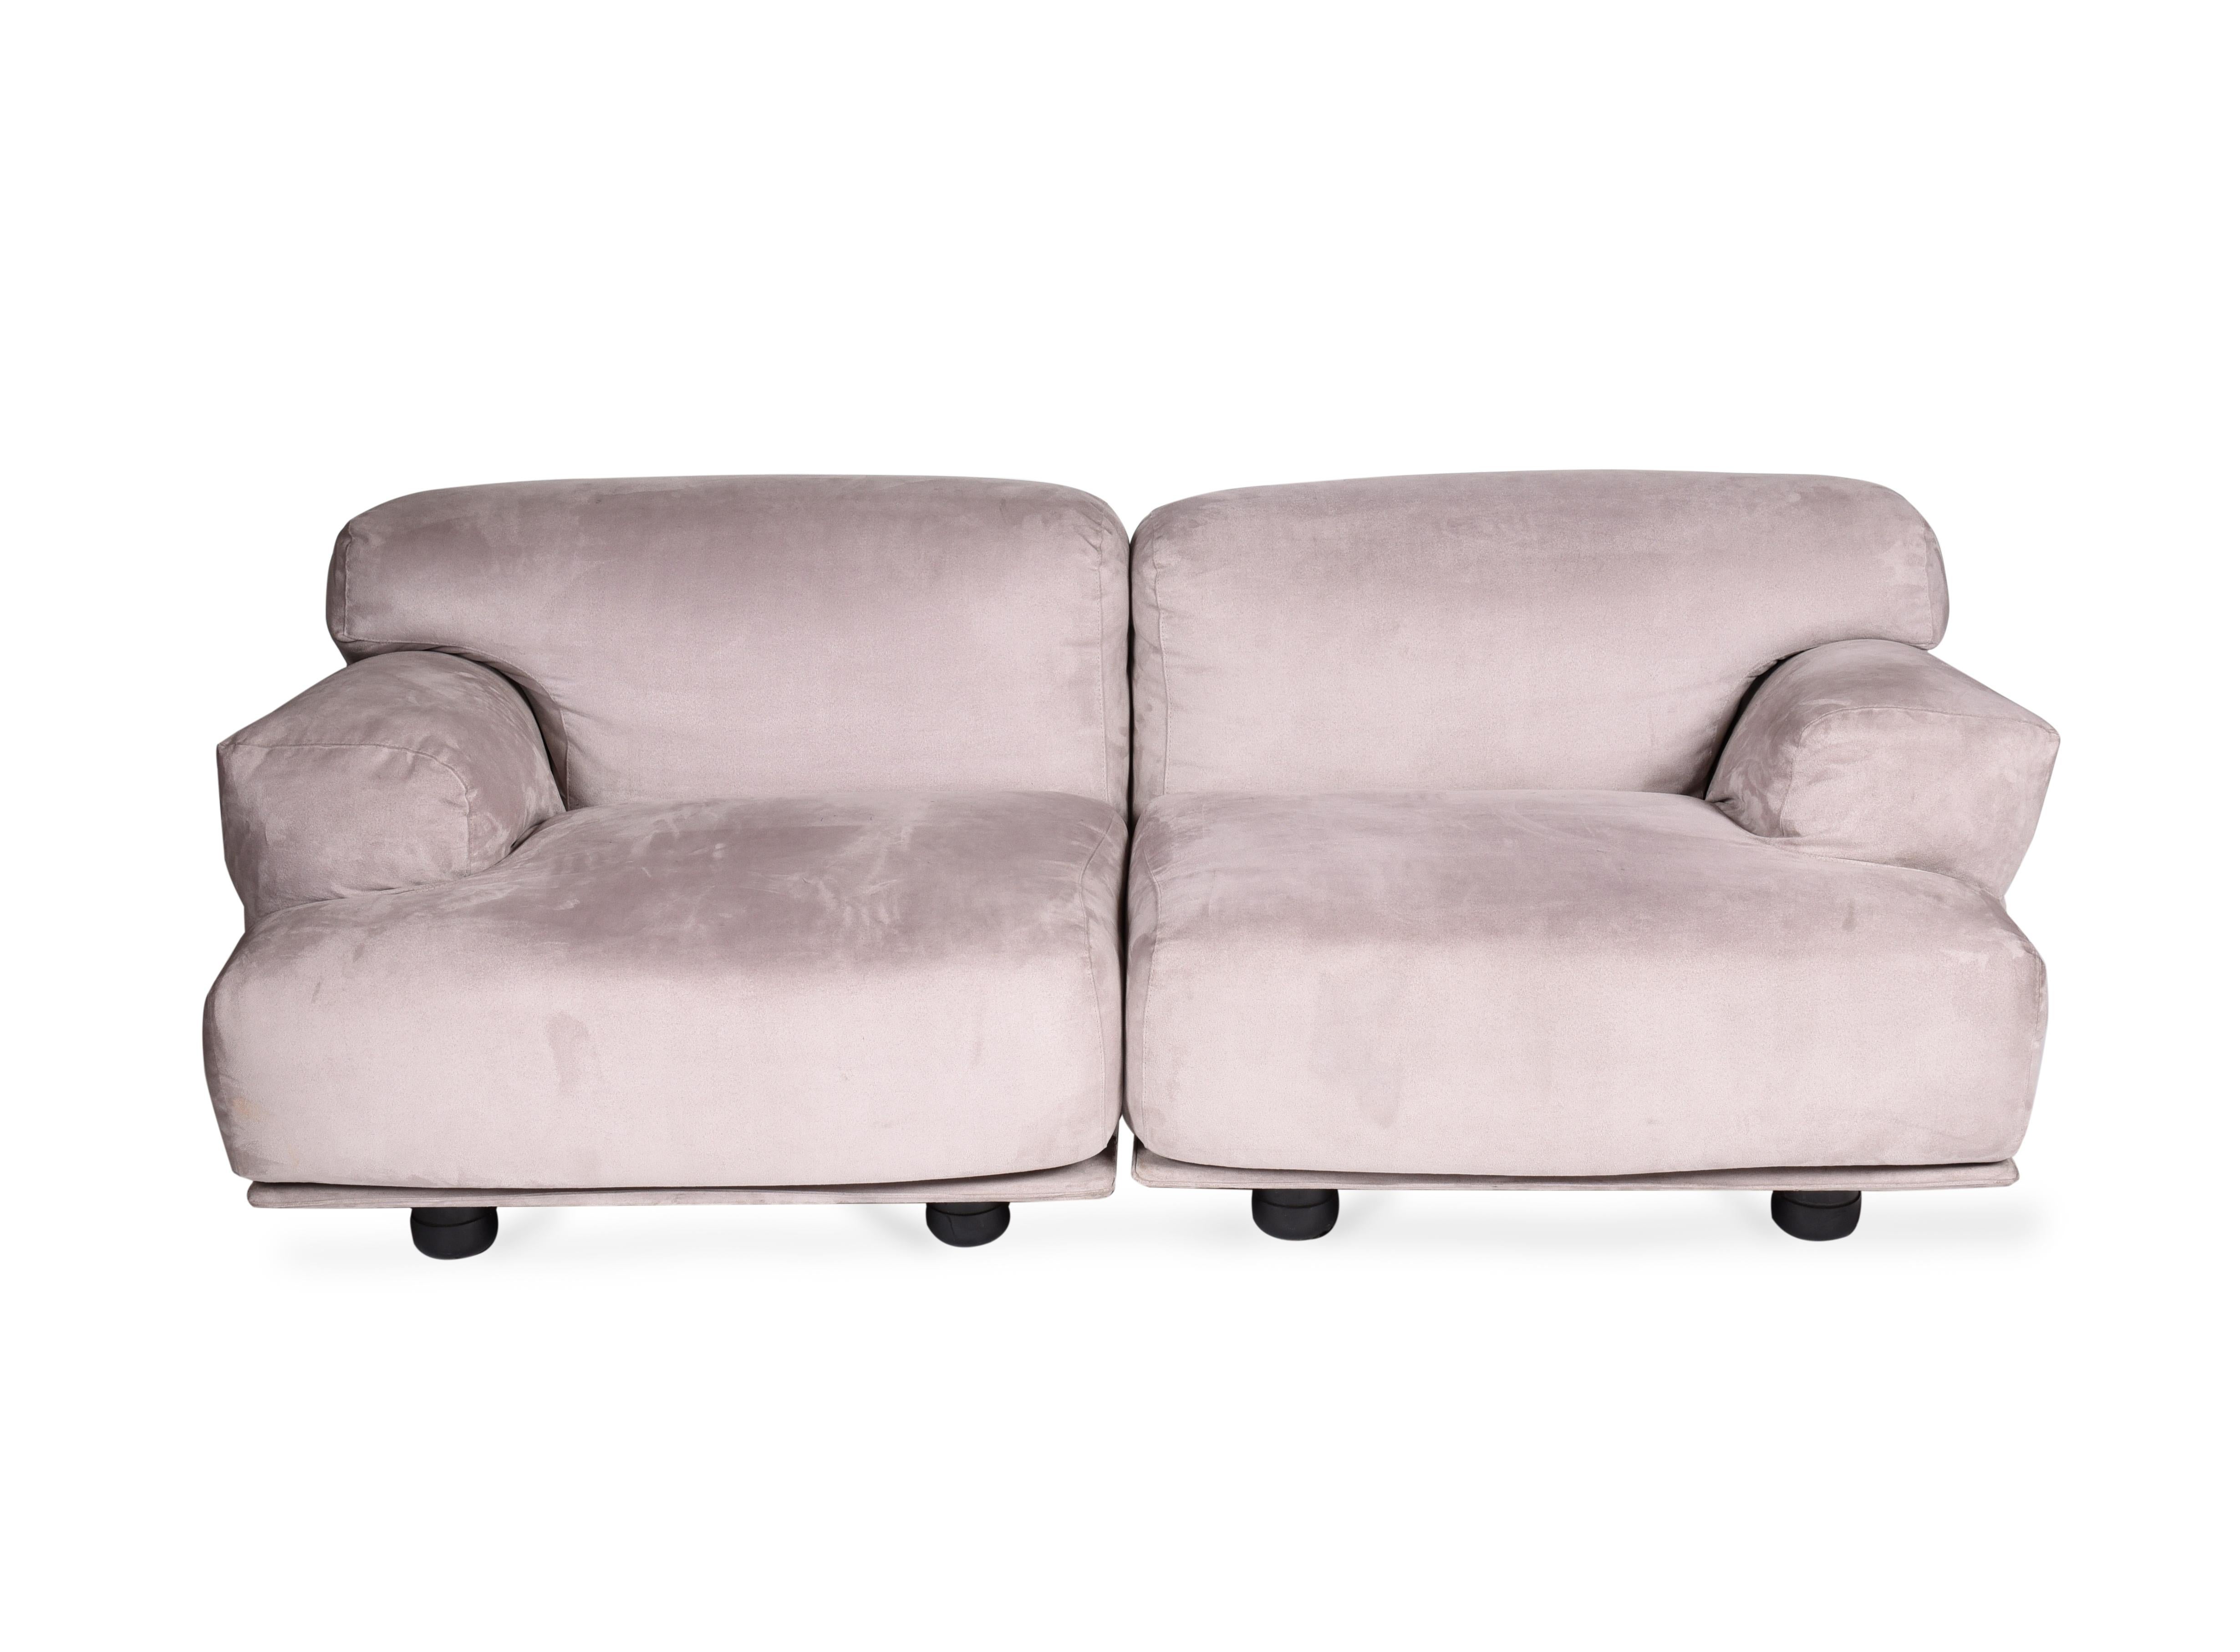 Midcentury Fiandra modular sofa by Vico Magistretti for Cassina.

Full-length upholstered sofa, built in a modular way, can be assembled in several different ways. Some of these settings are shown in the photos.